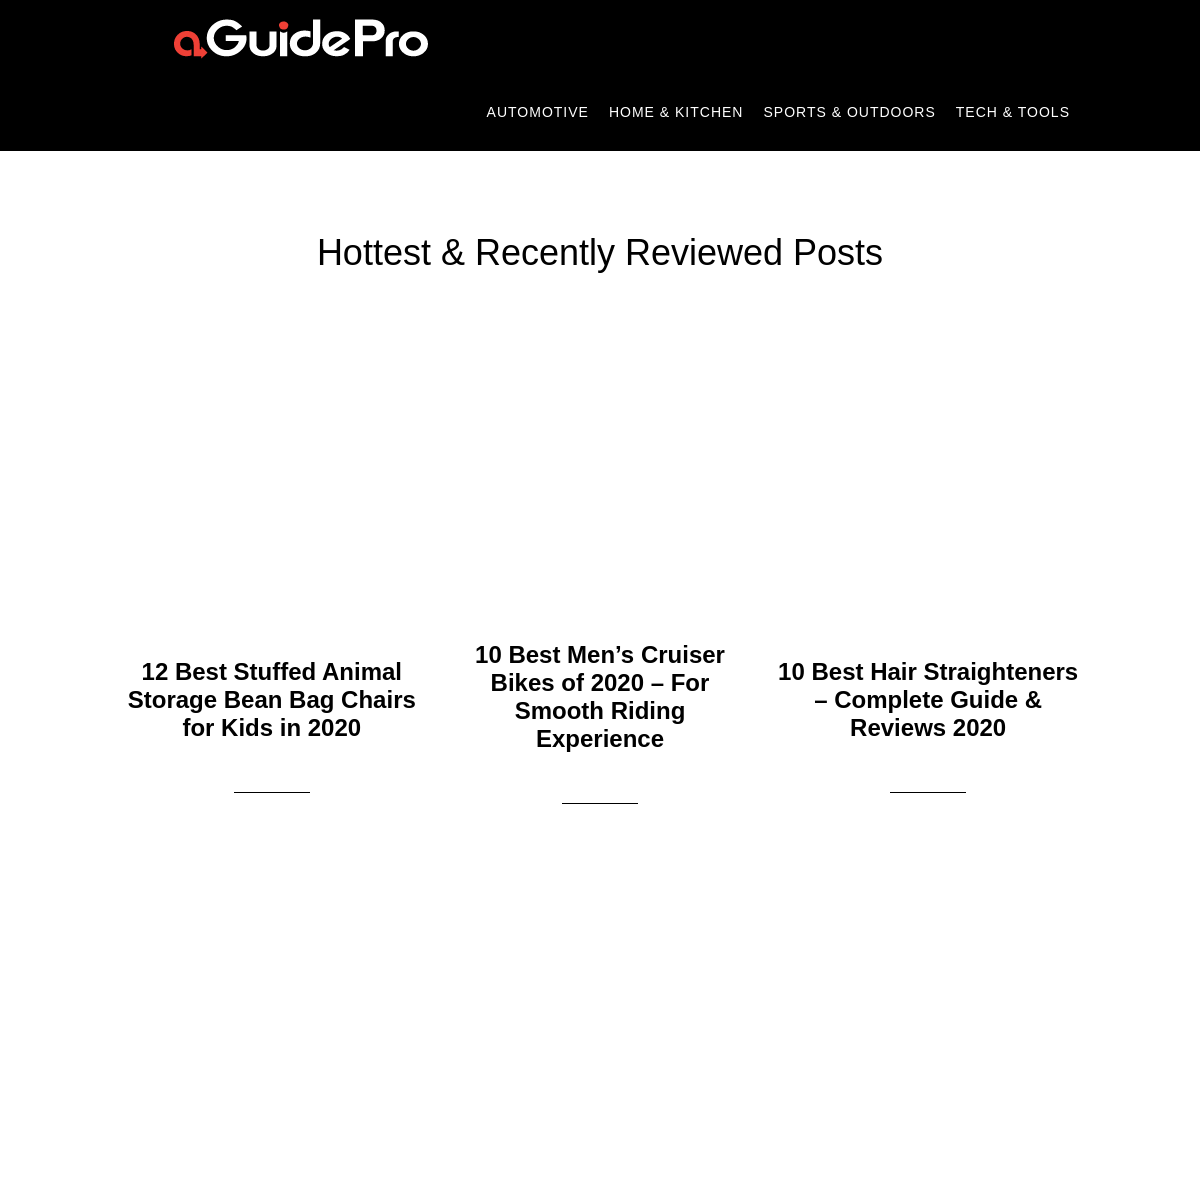 A complete backup of aguidepro.com